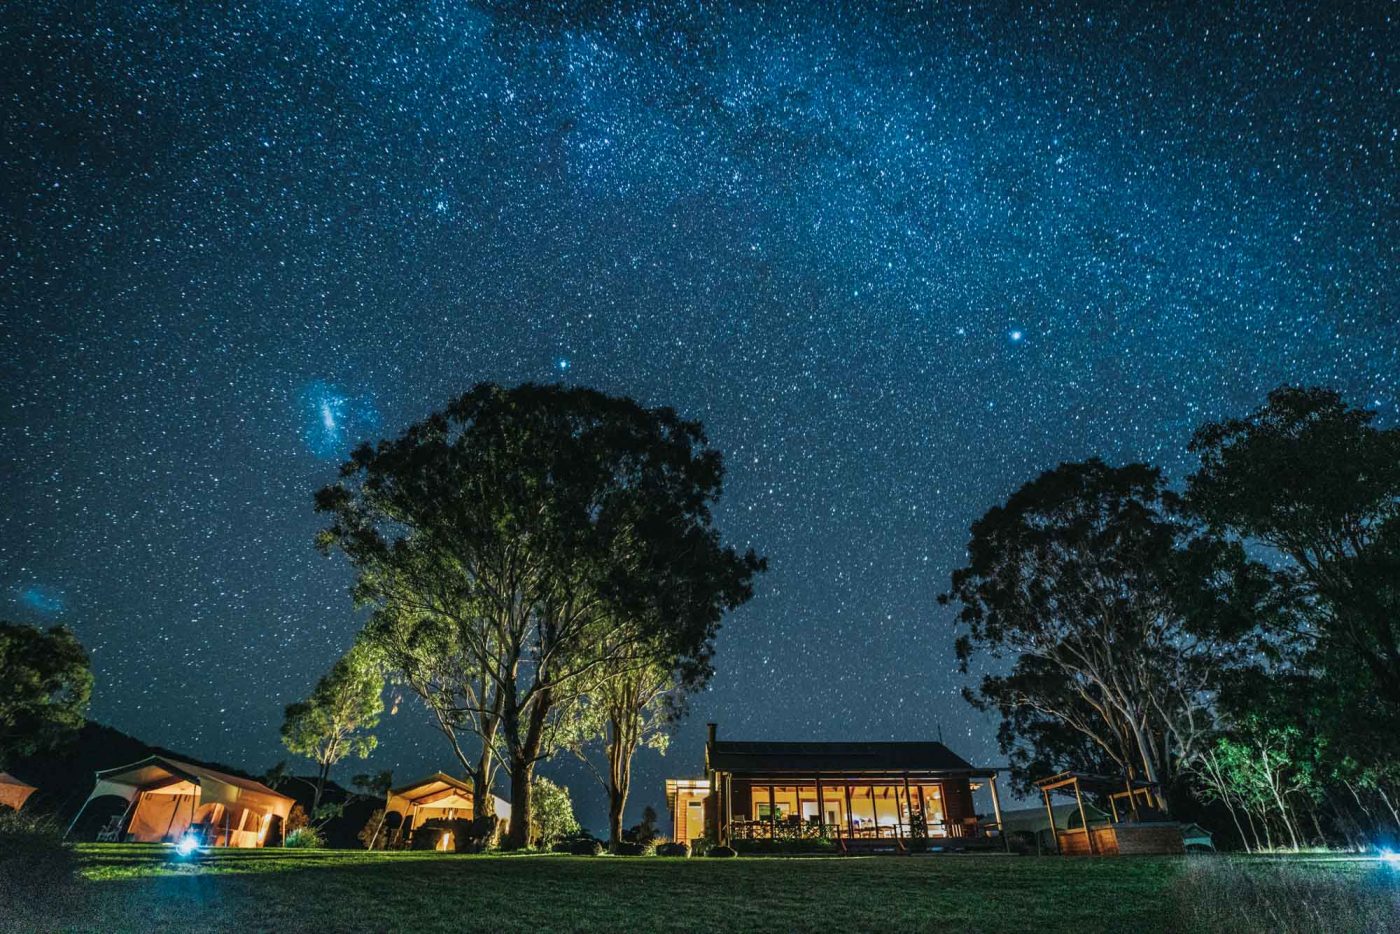 Sydney to Brisbane road trip: Spicers Canopy Lodge, glamping accommodation on the Scenic Rim Trail